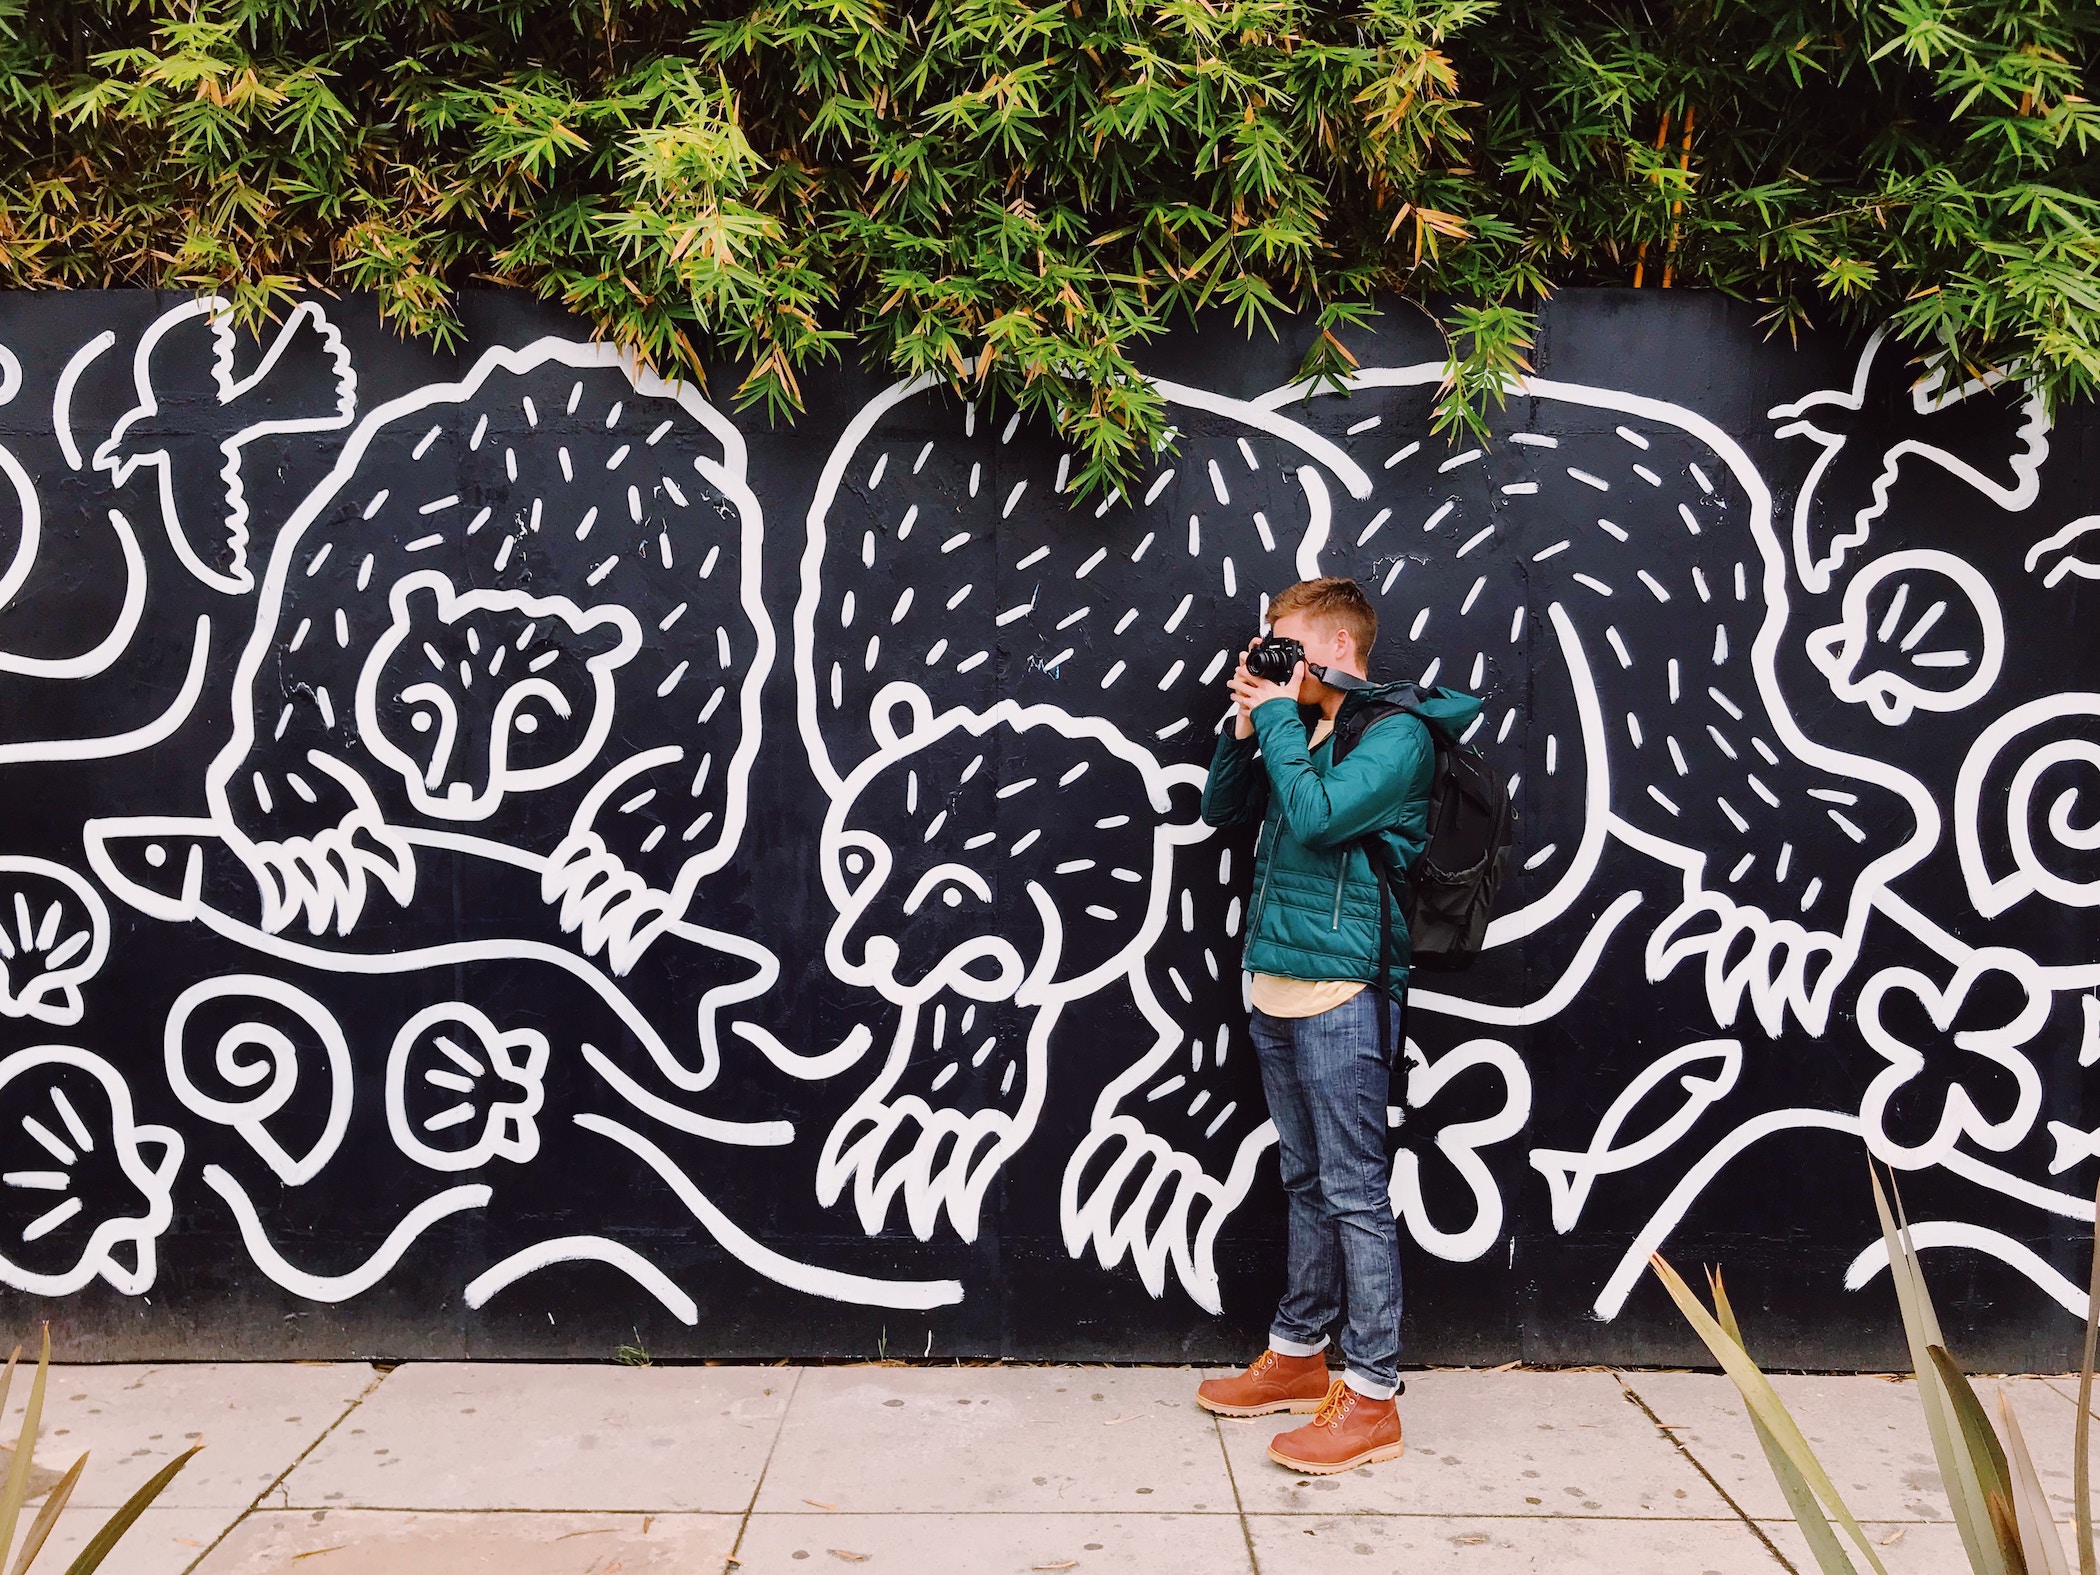 Man taking photo by mural